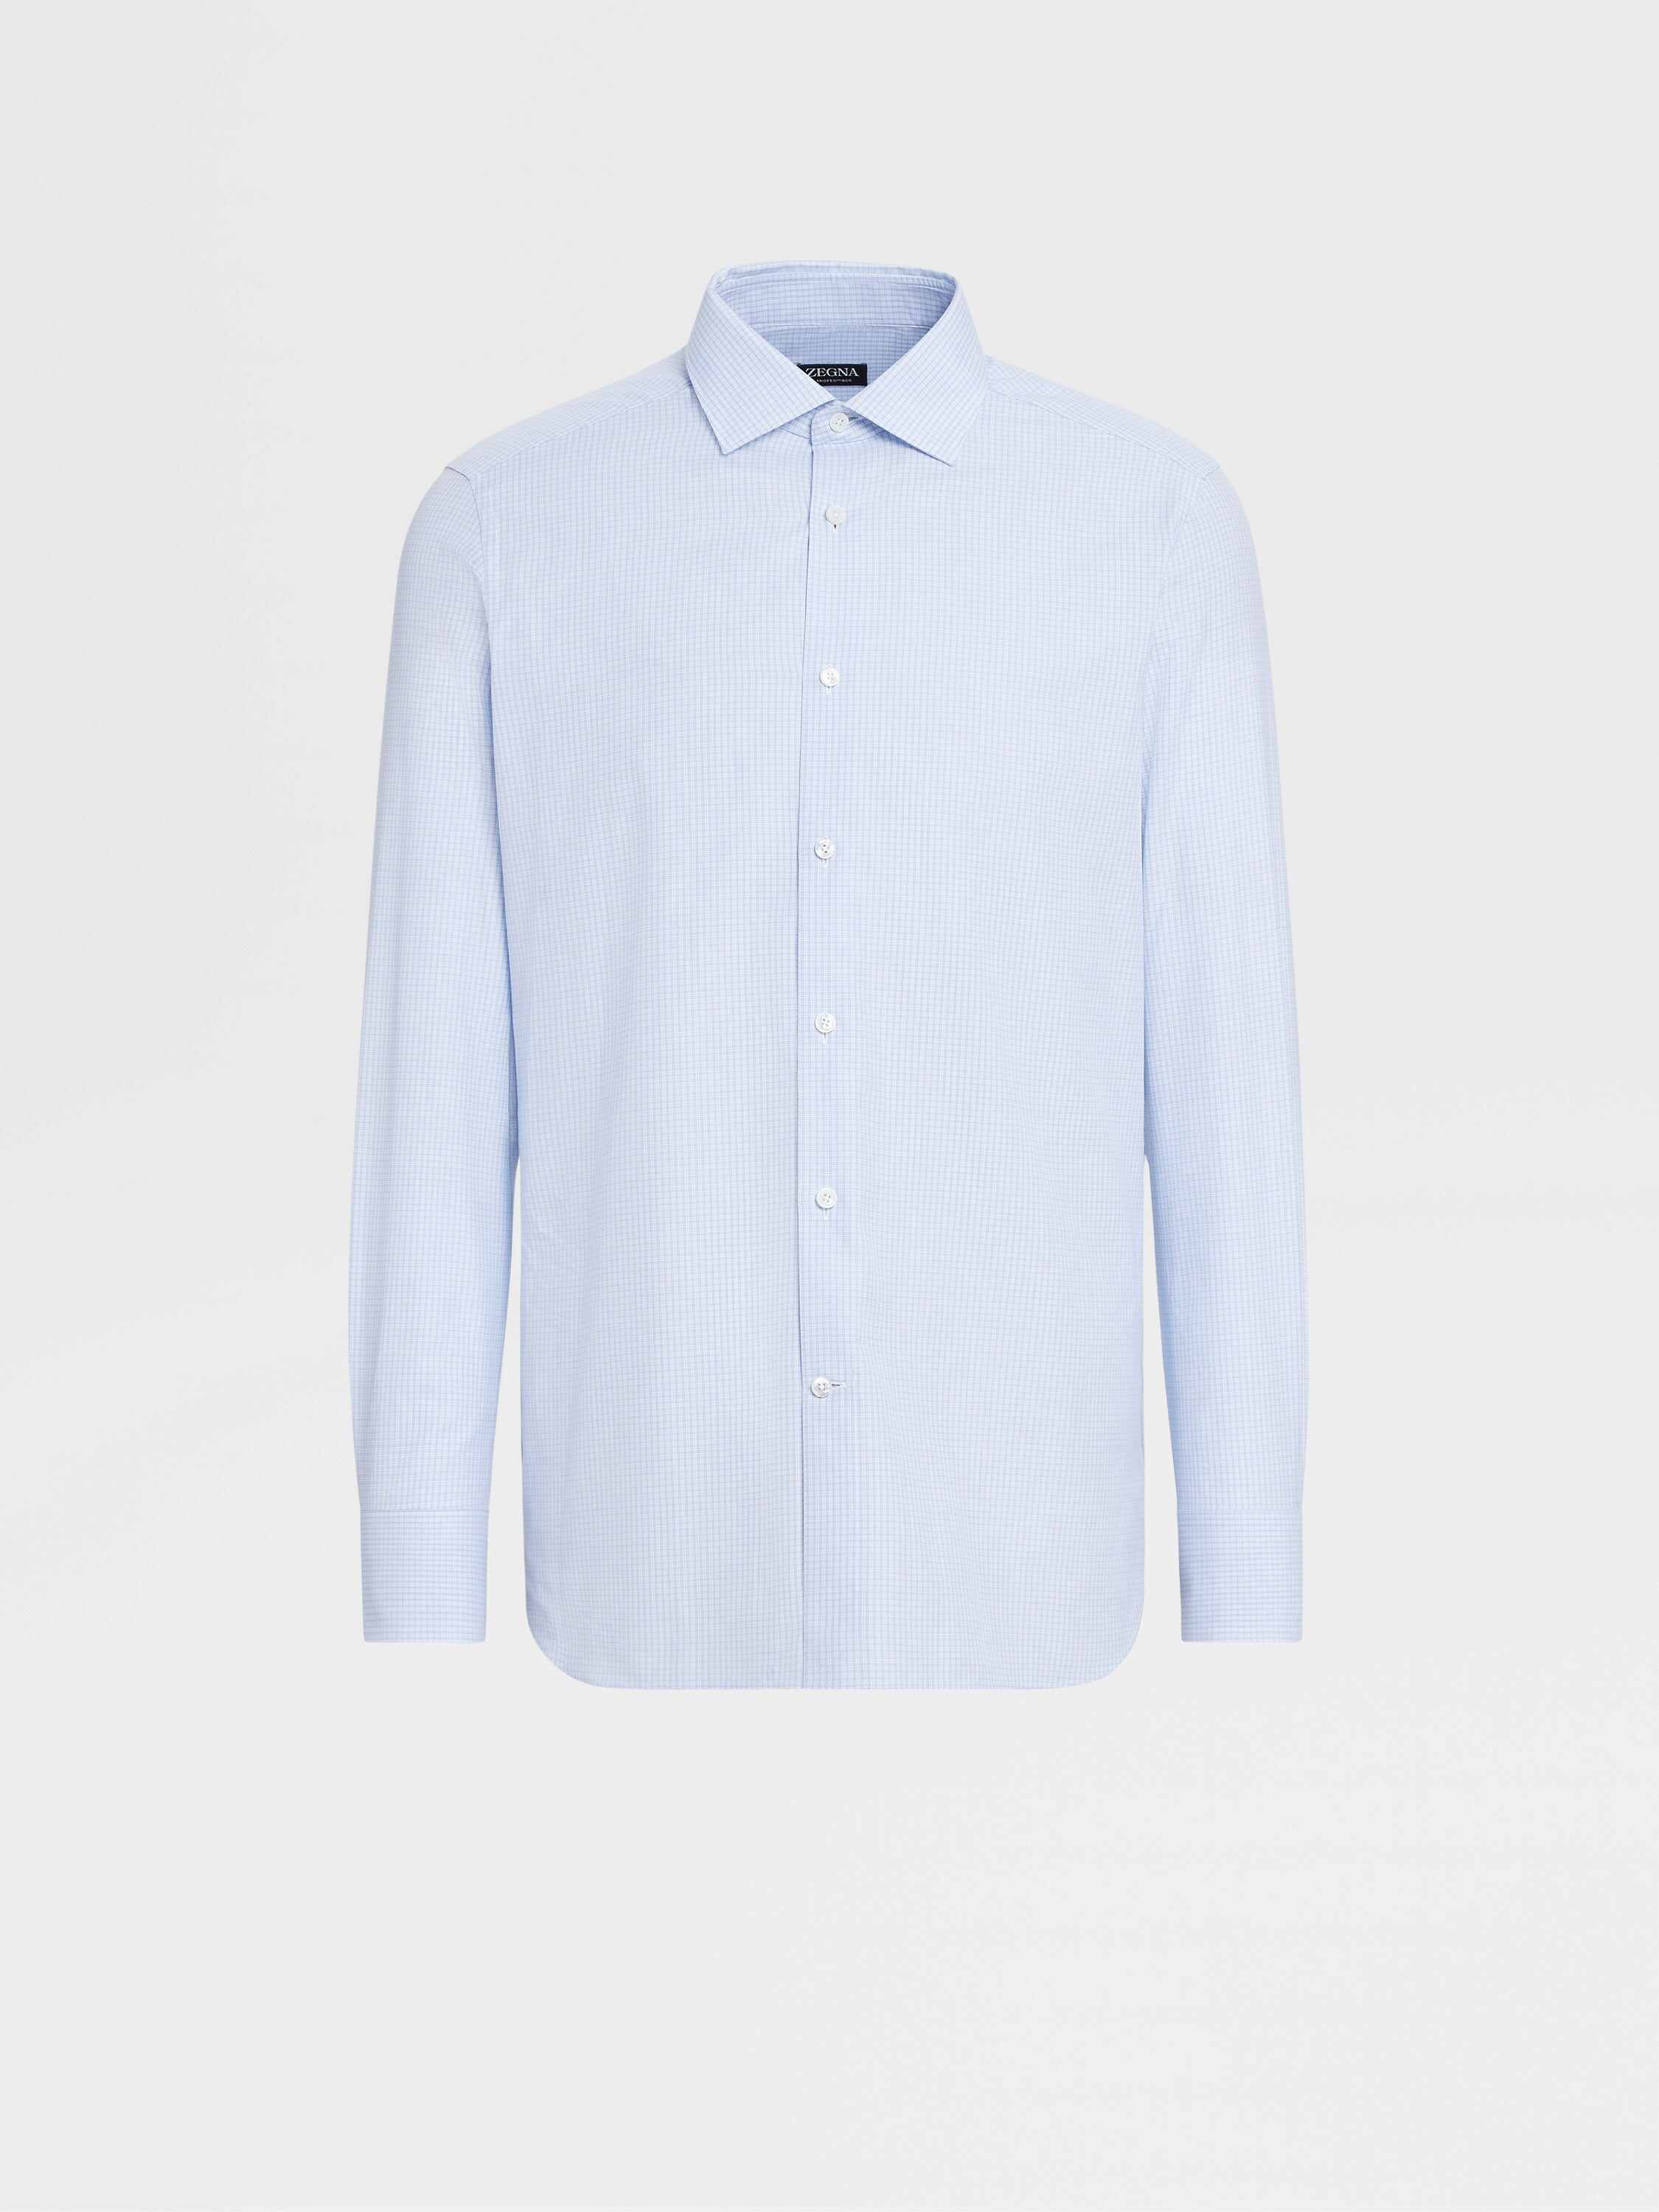 White and Light Blue Trofeo™ 600 Cotton and Silk Long-sleeve Tailoring Shirt